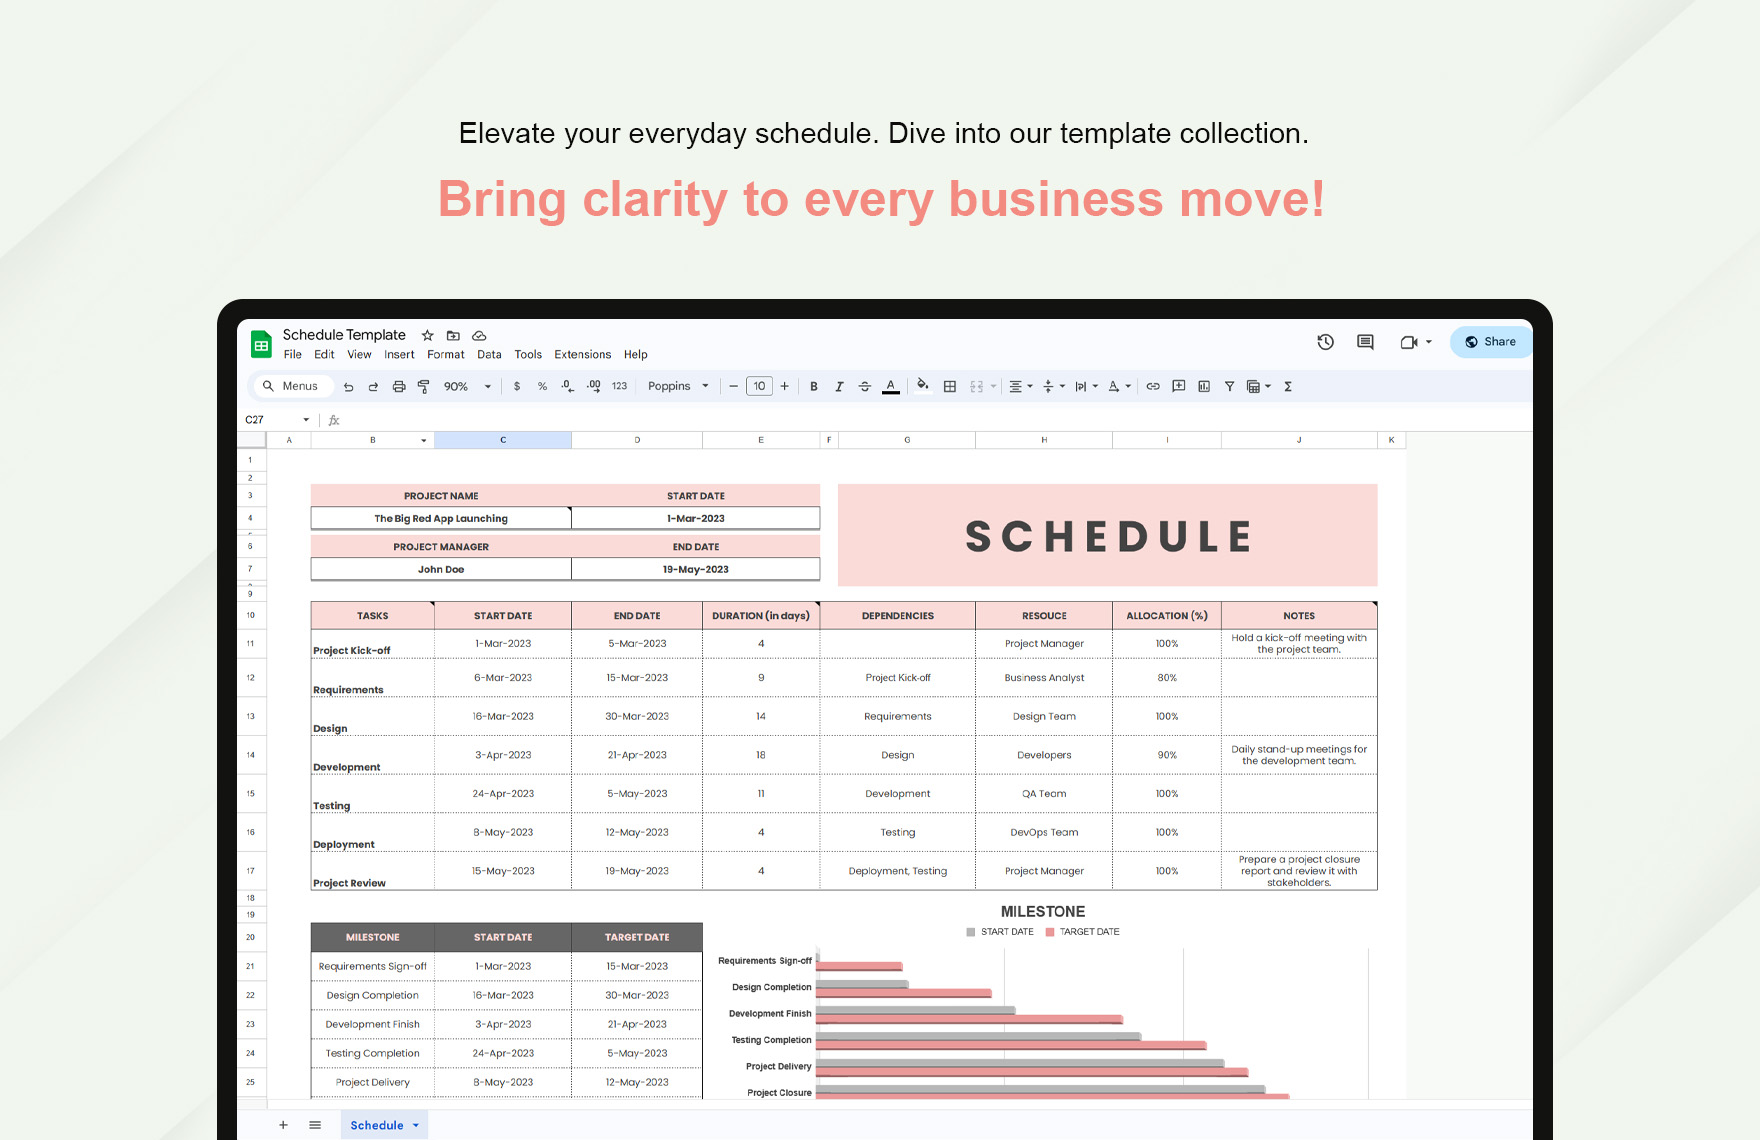 Free Schedule Template - Download in Excel, Google Sheets | Template.net